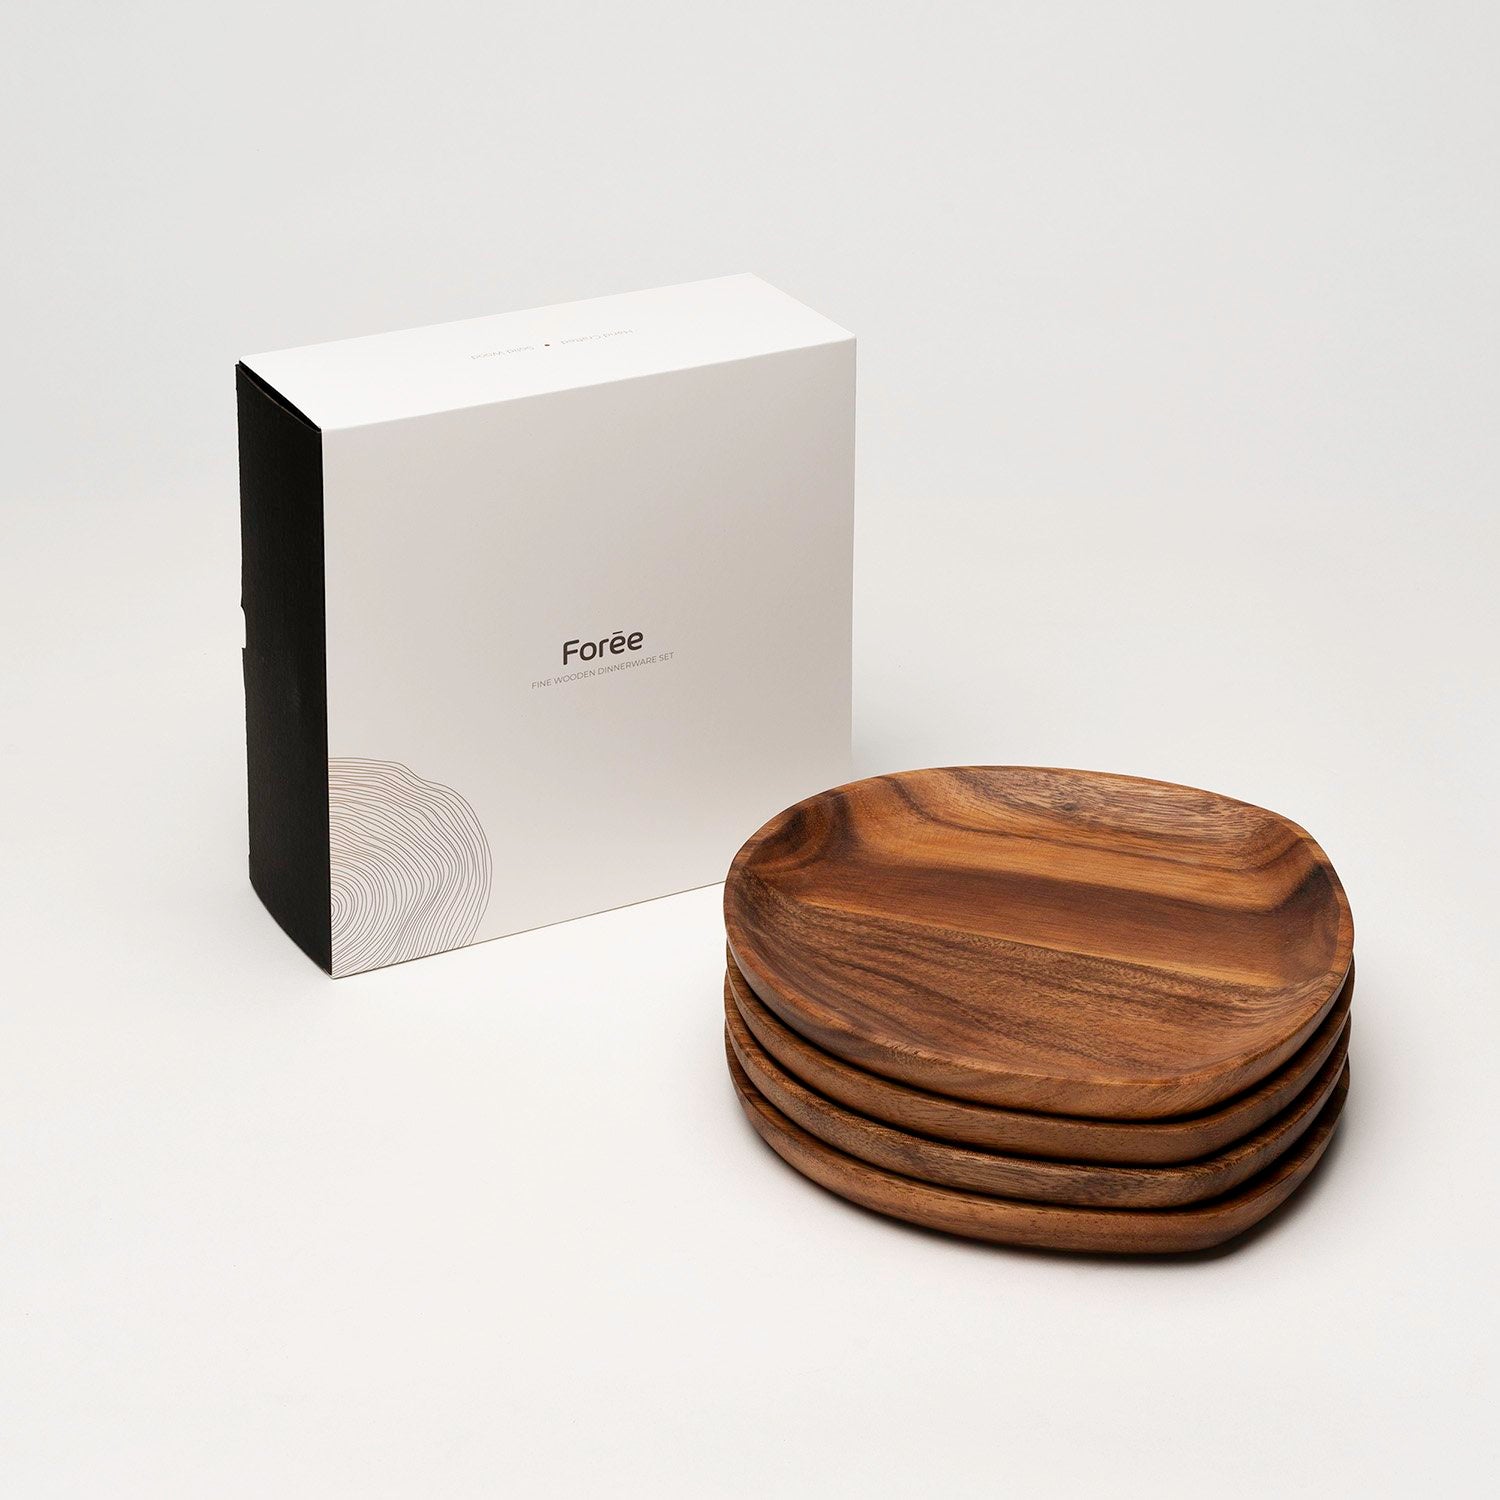 Four medium wooden plates stacked